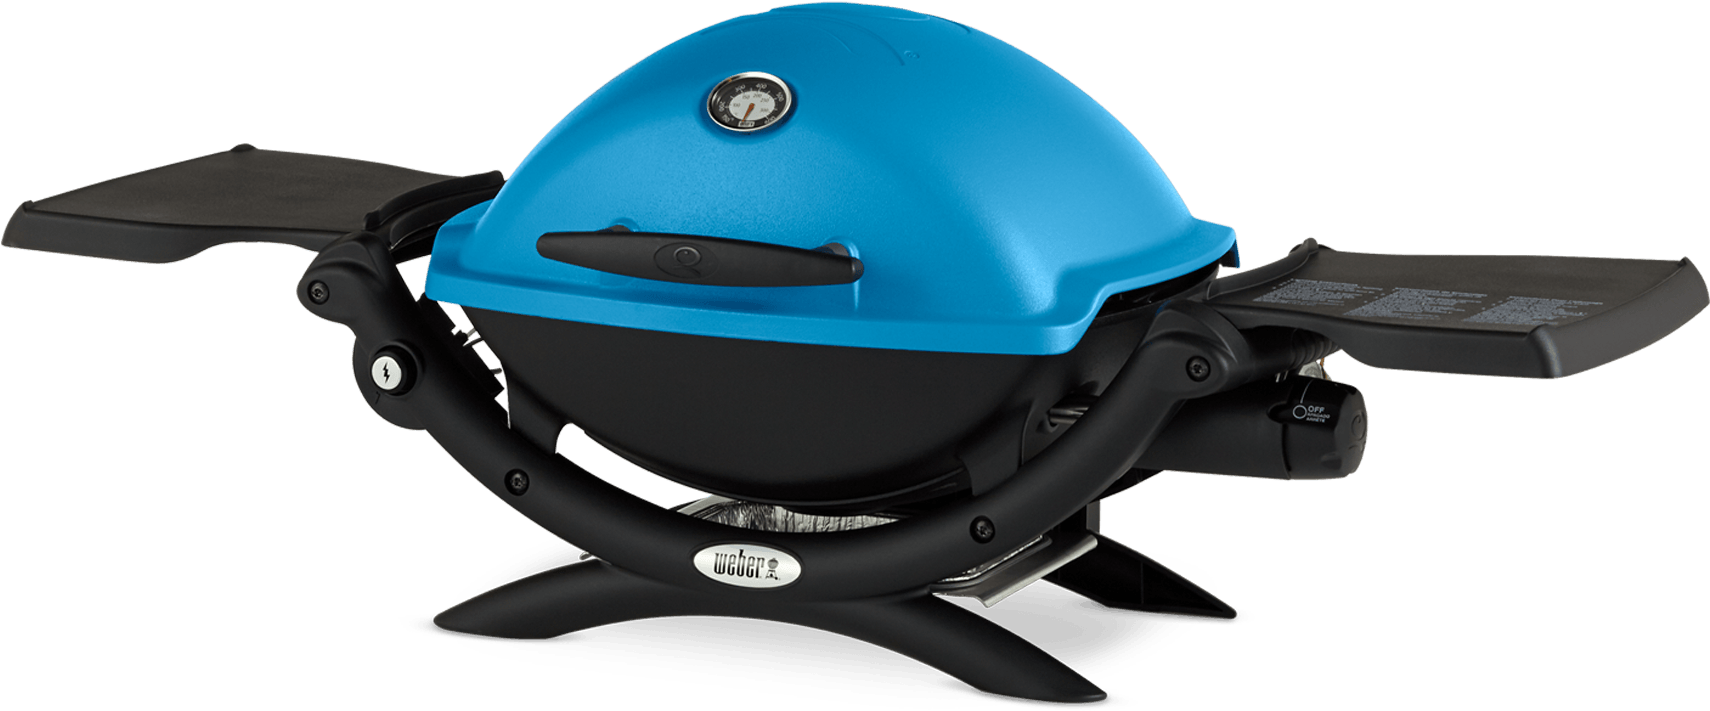 Blue Portable Gas Grill PNG